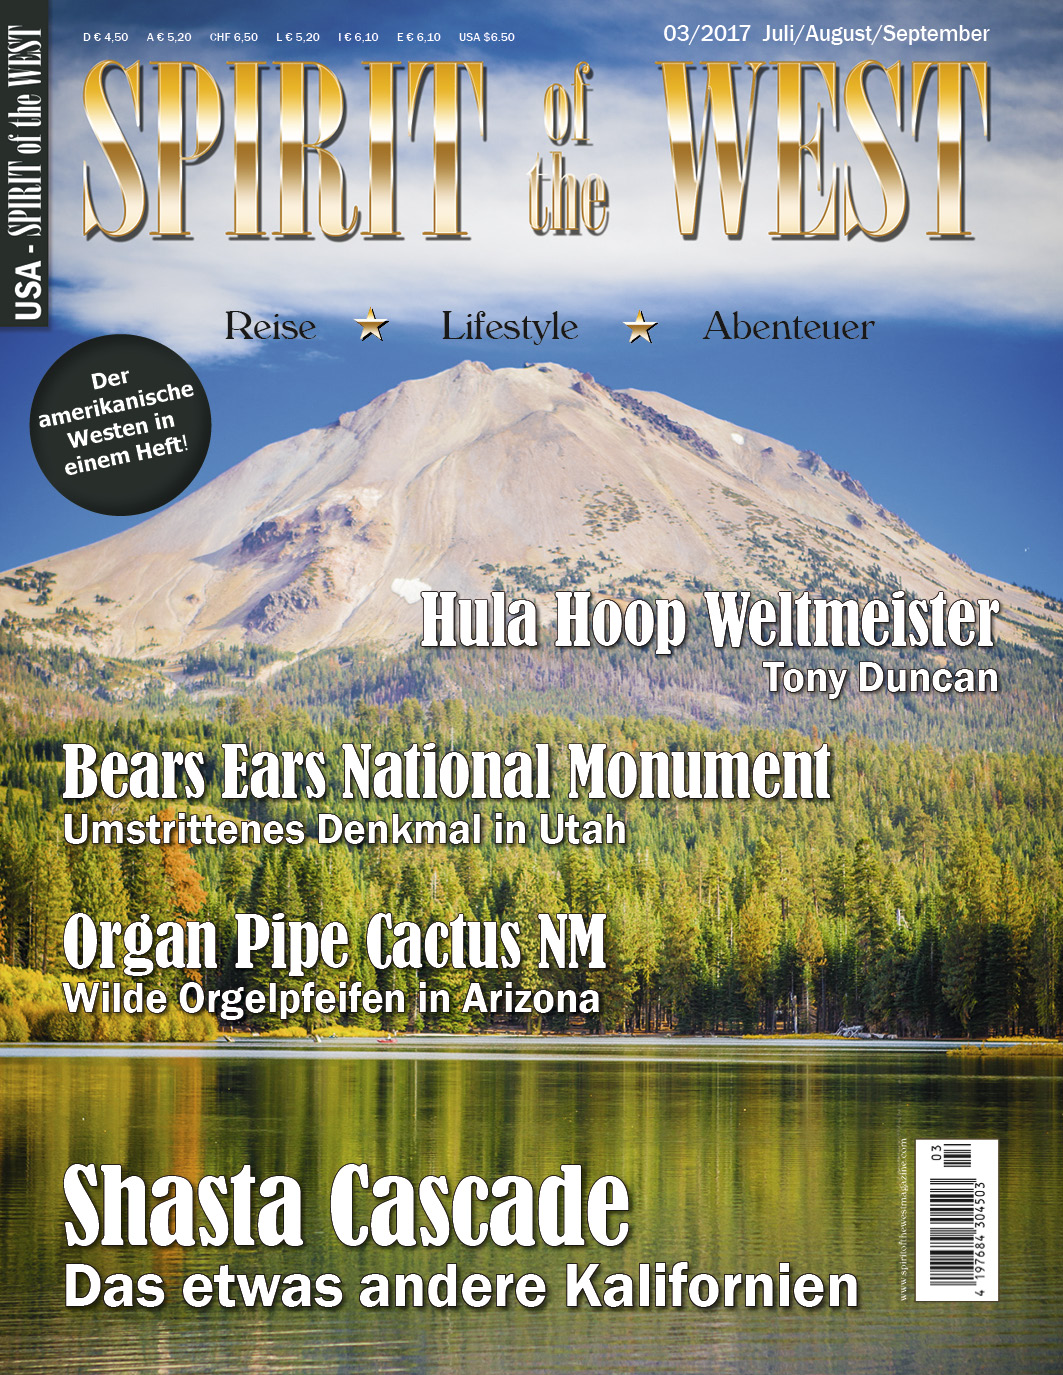 SOTW 032017 Cover